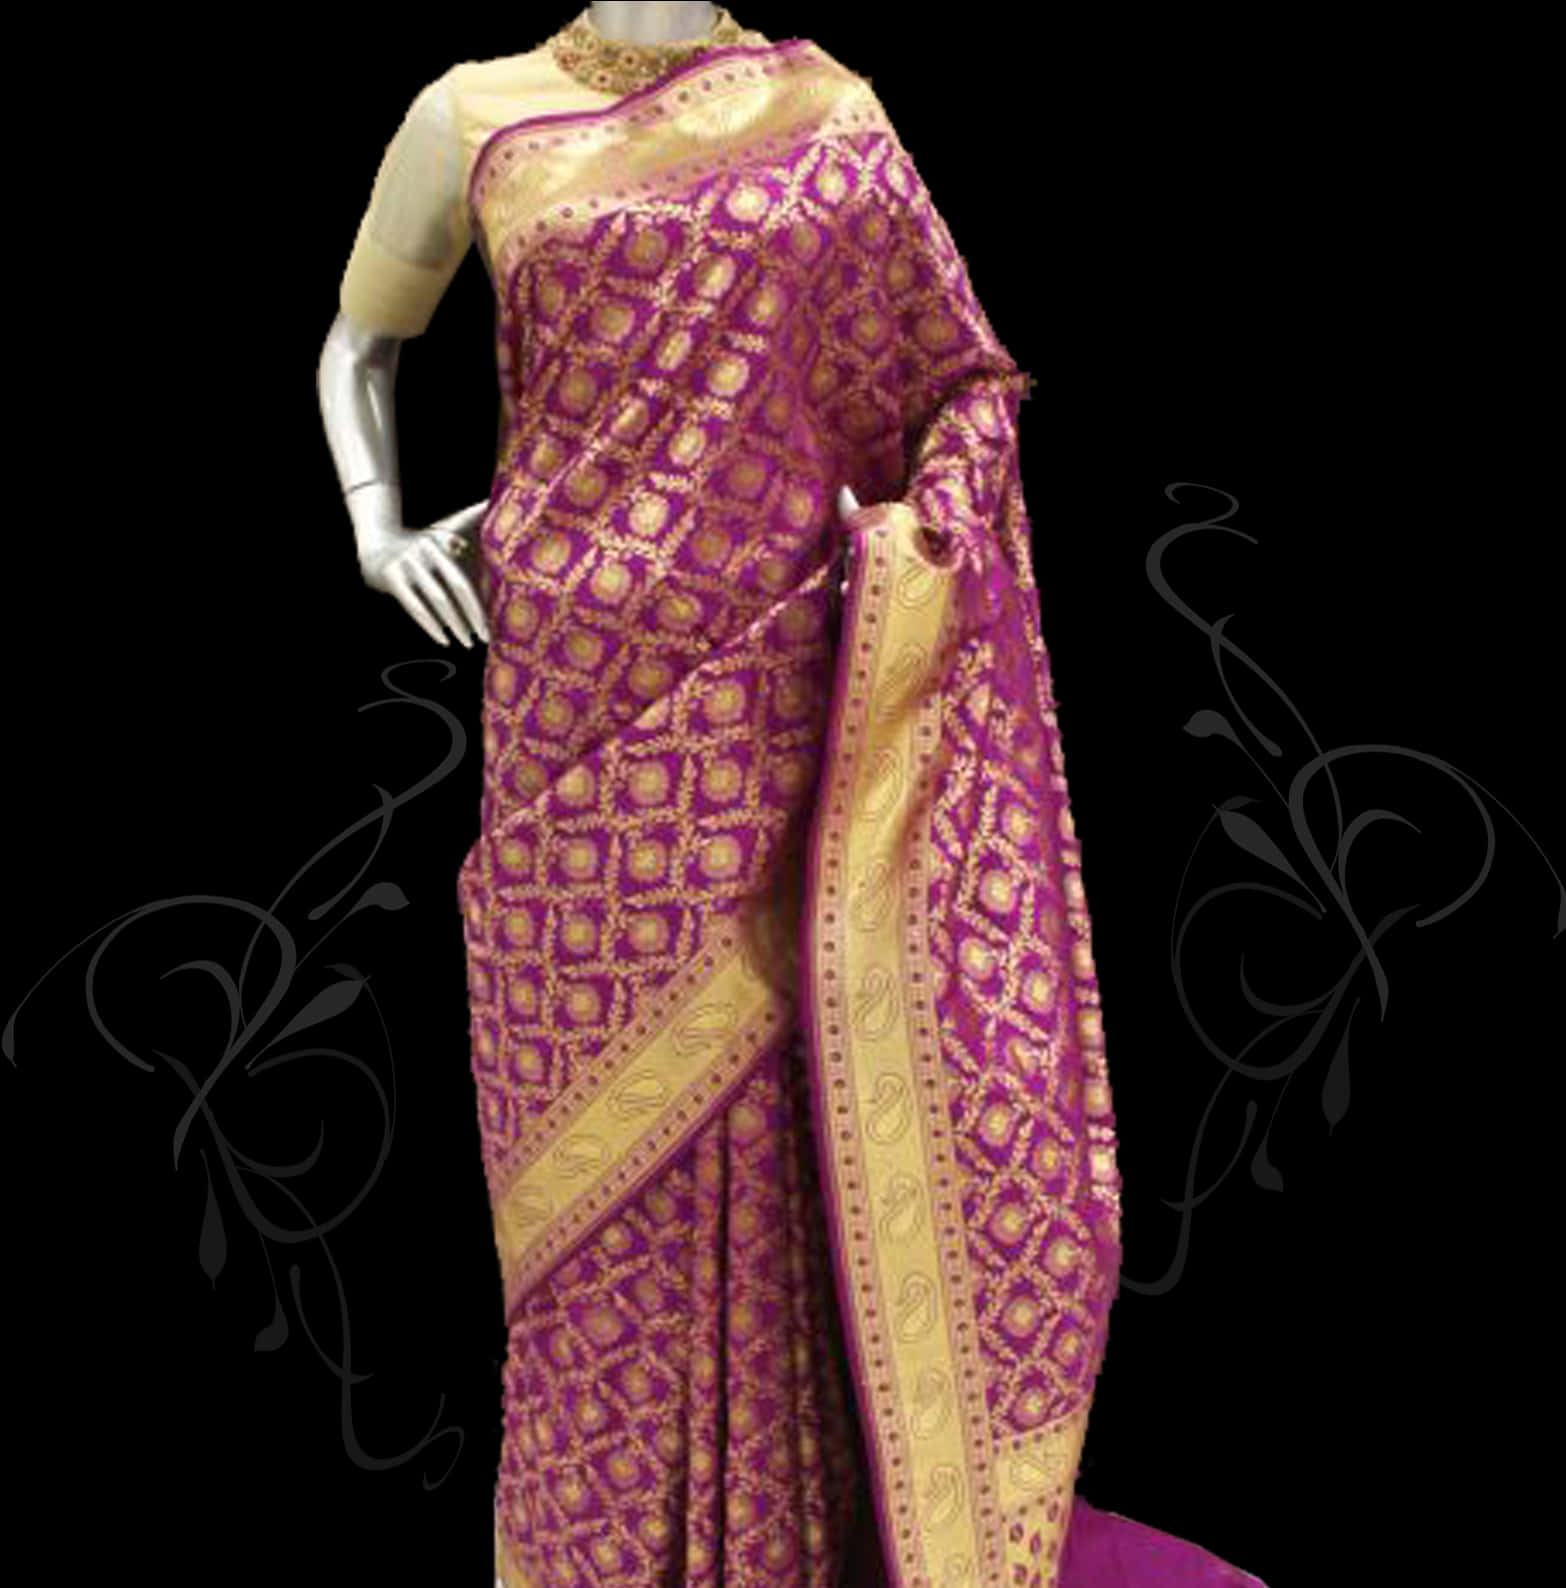 A Mannequin Wearing A Purple And Gold Sari